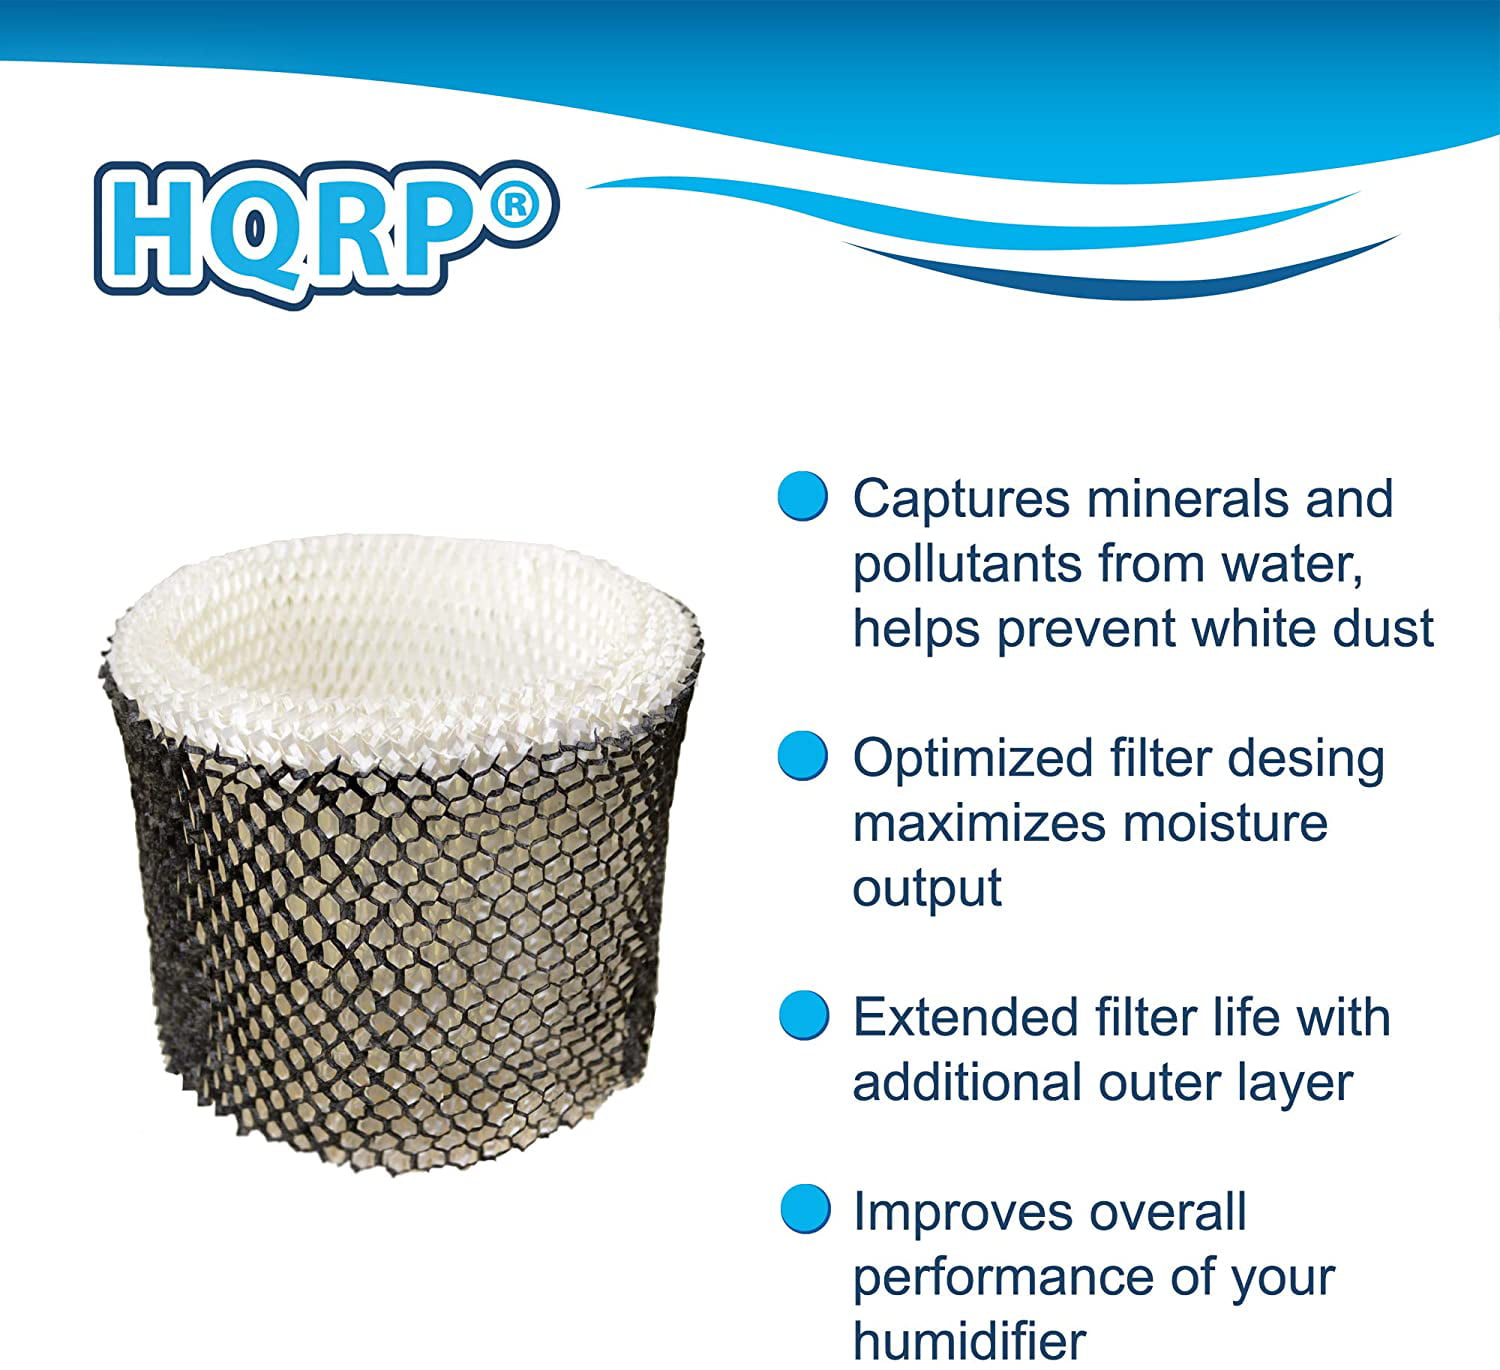 3x Humidifier Filter for Holmes HM1730,HM1750,HM1750GS,HM2220,Touch Point S30E 